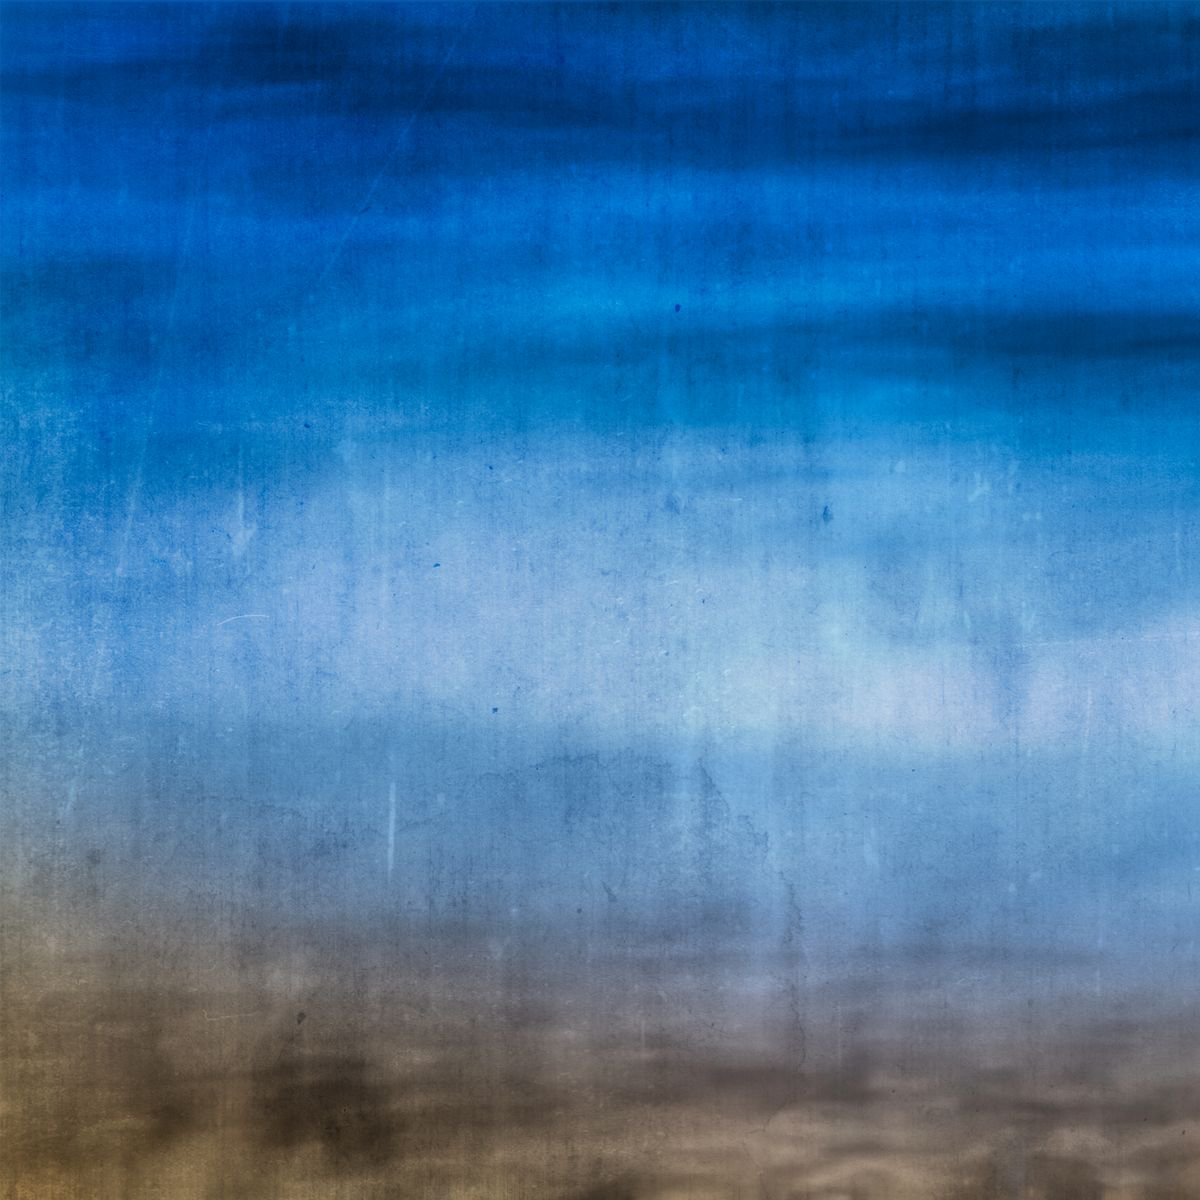 Calming Sea Limited Edition 1/50 10x10 inch Photographic Print. by Graham Briggs